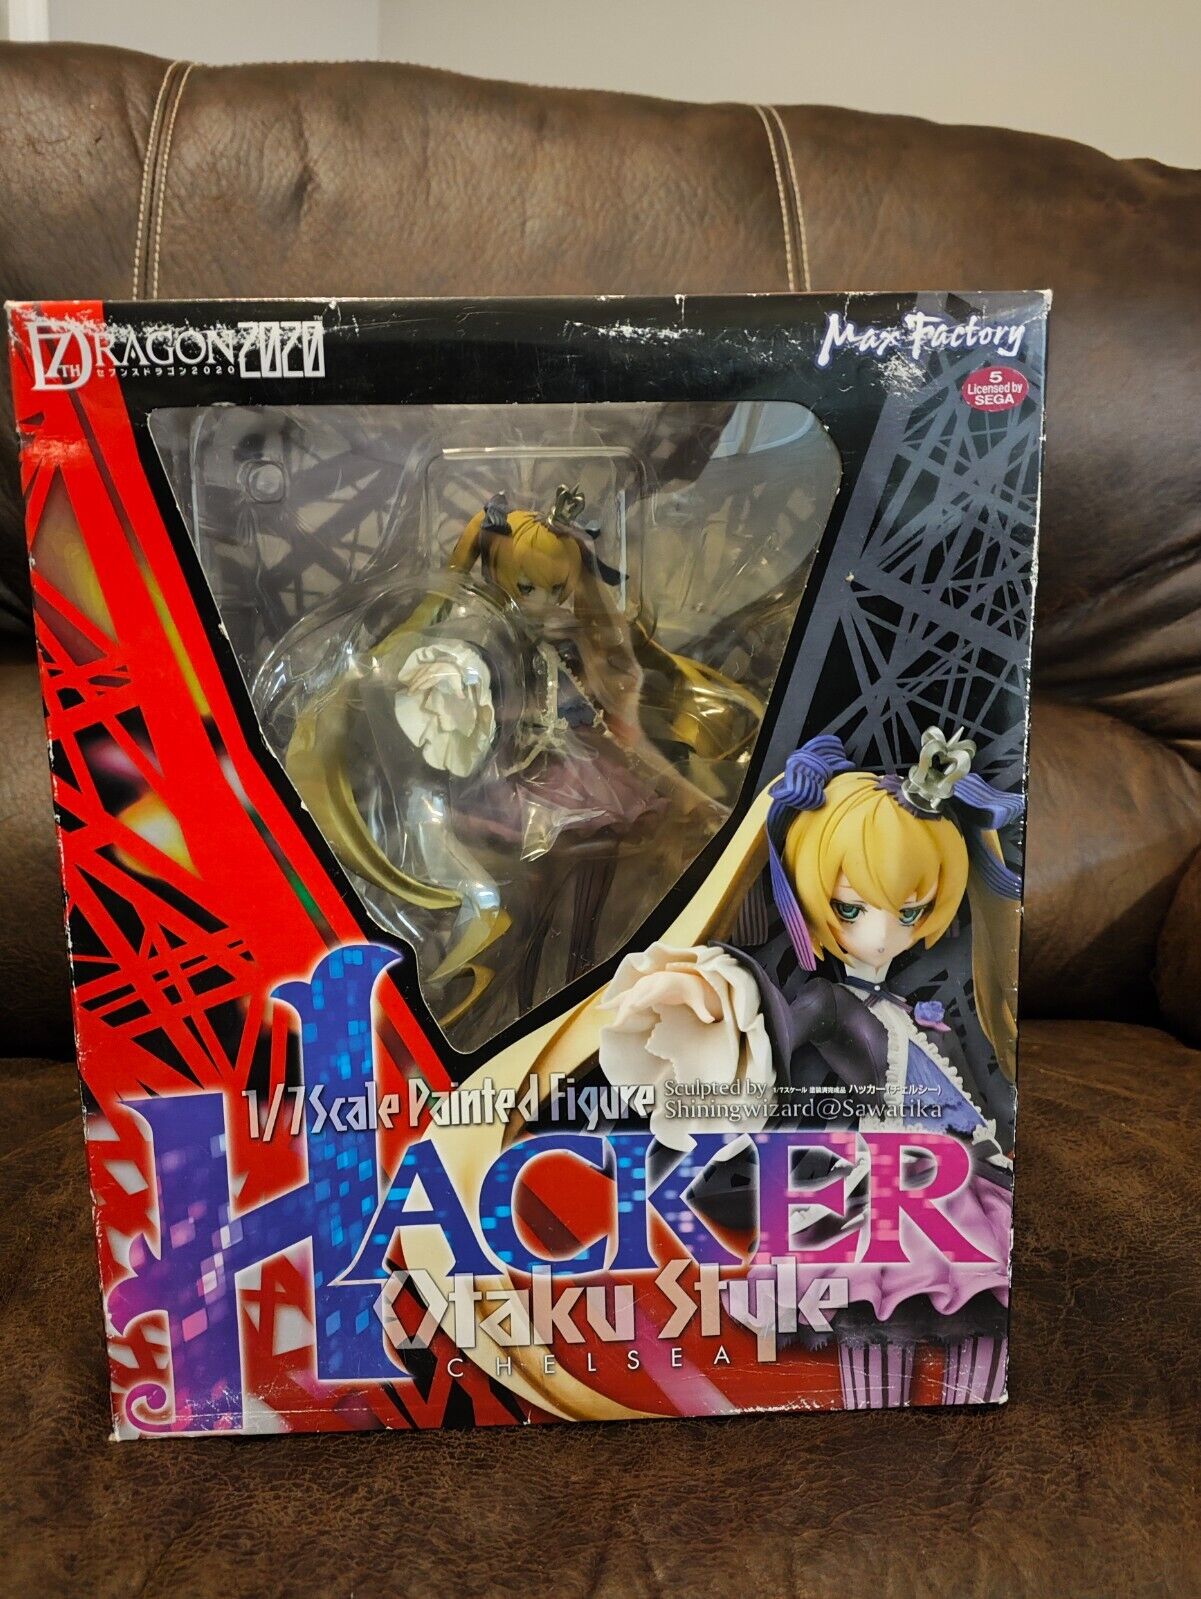 New Max Factory 7th Seventh Dragon 2020 Hacker Class 1:7 PVC figure From Japan